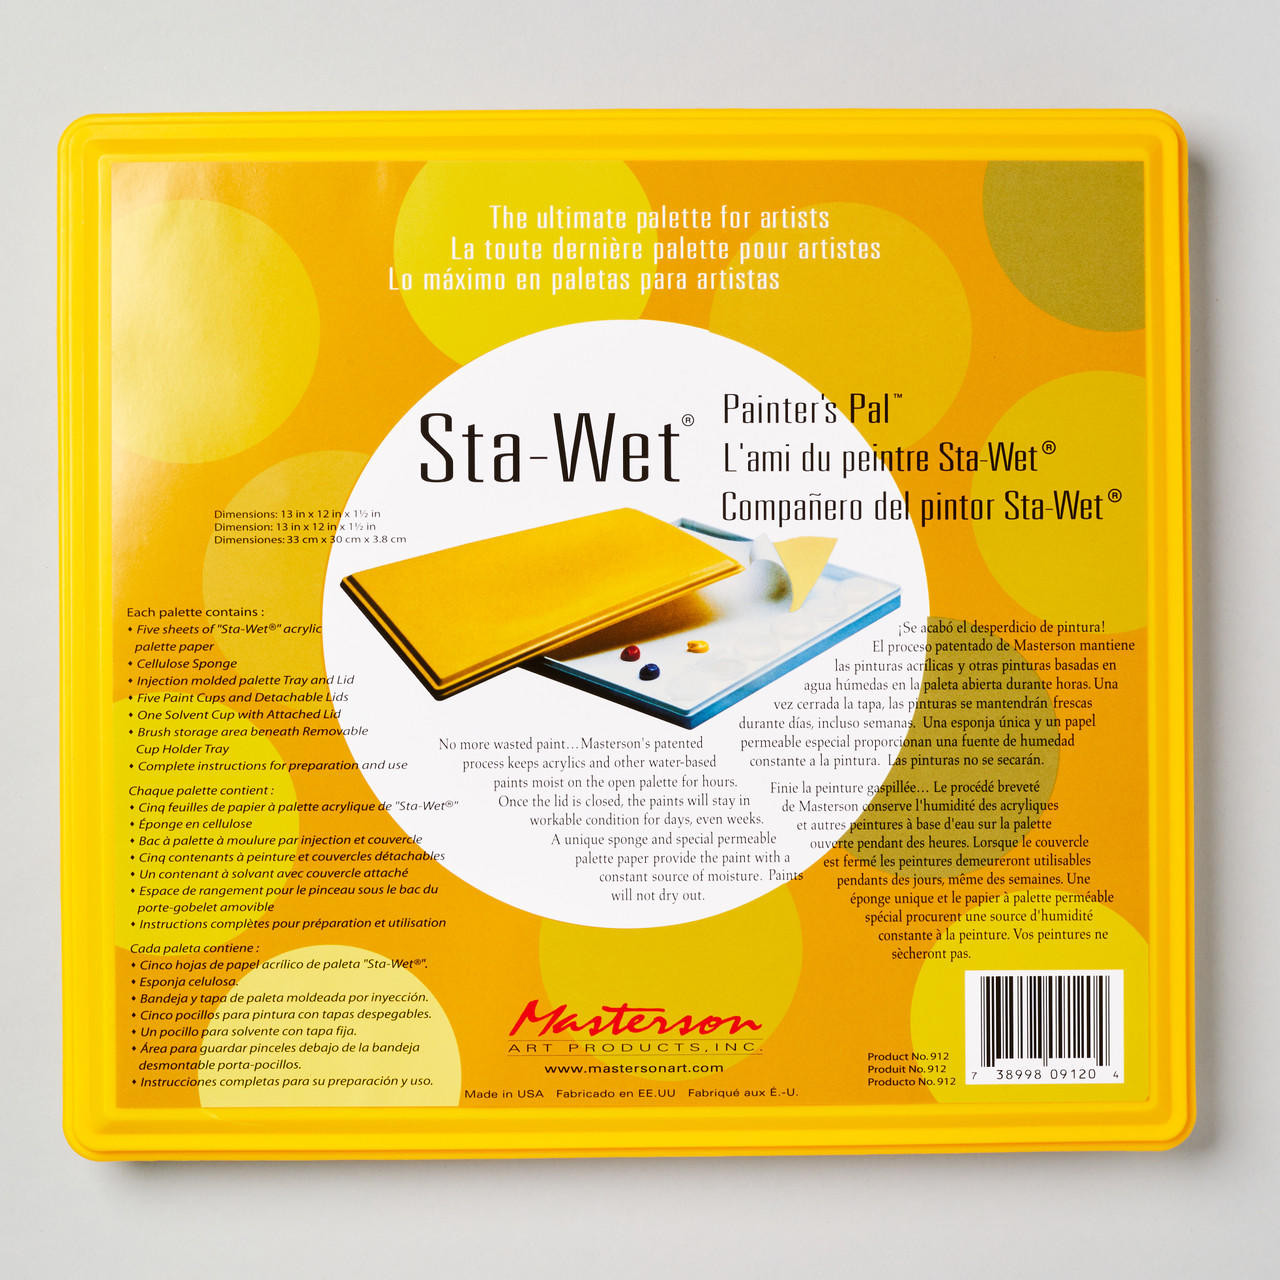 Masterson Sta-Wet Painters Pal Palette Kit, Acrylic Based Paint, with 12 x  13 Inch Palette with Lid, 30 Acrylic Sheets, Sponge Refill, Number 1 in